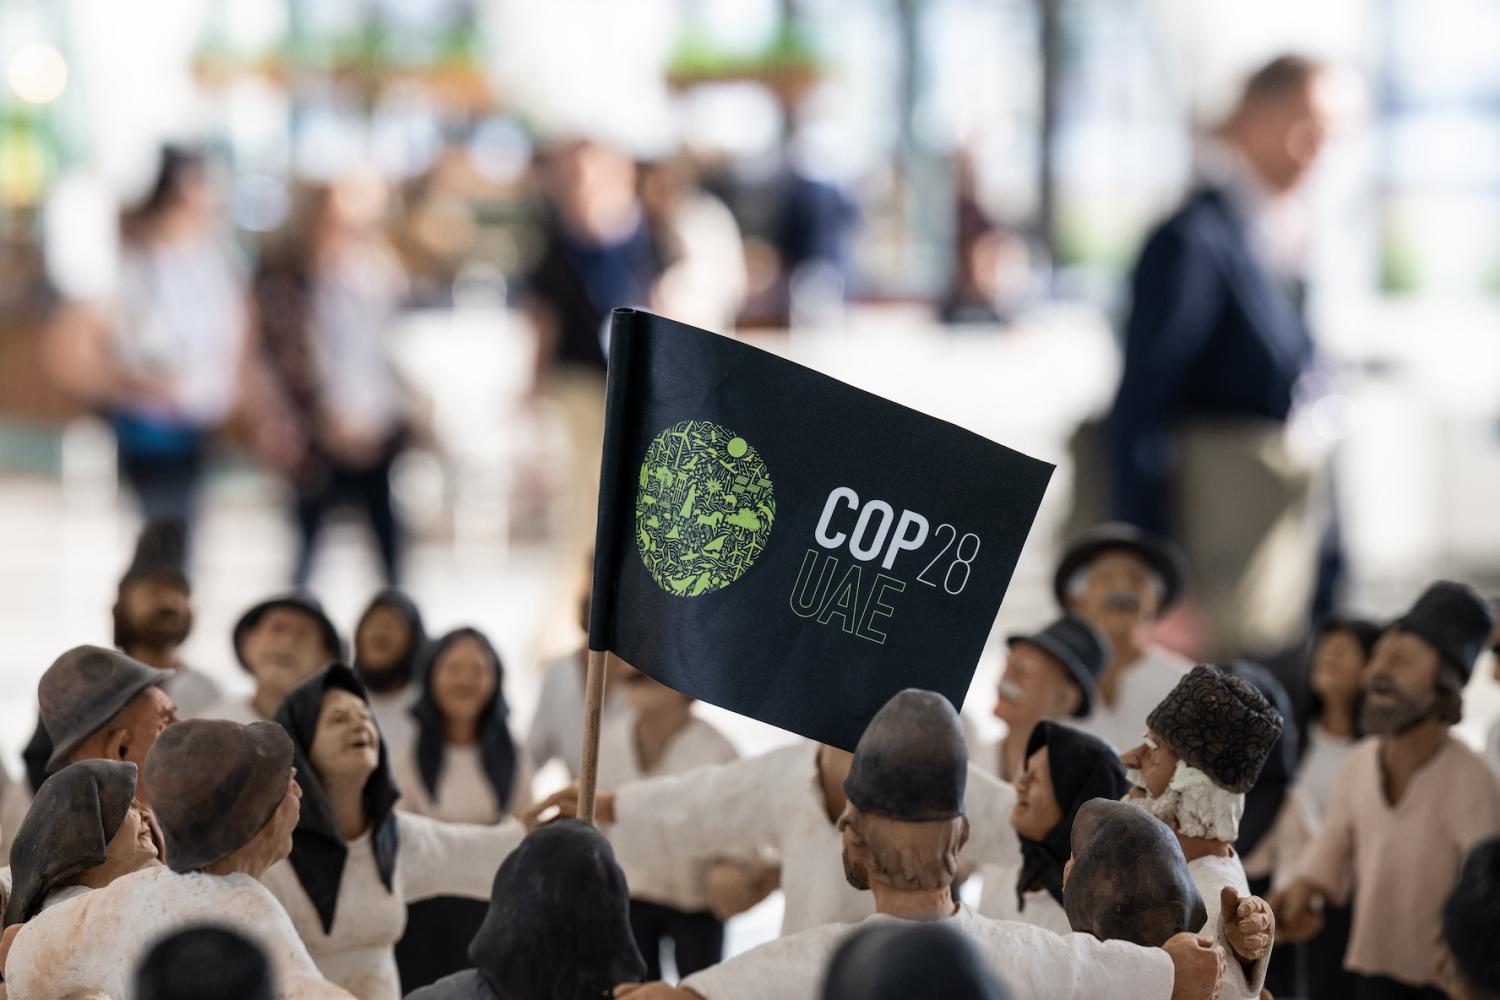 View of a "COP28UAE" flag in a hall.